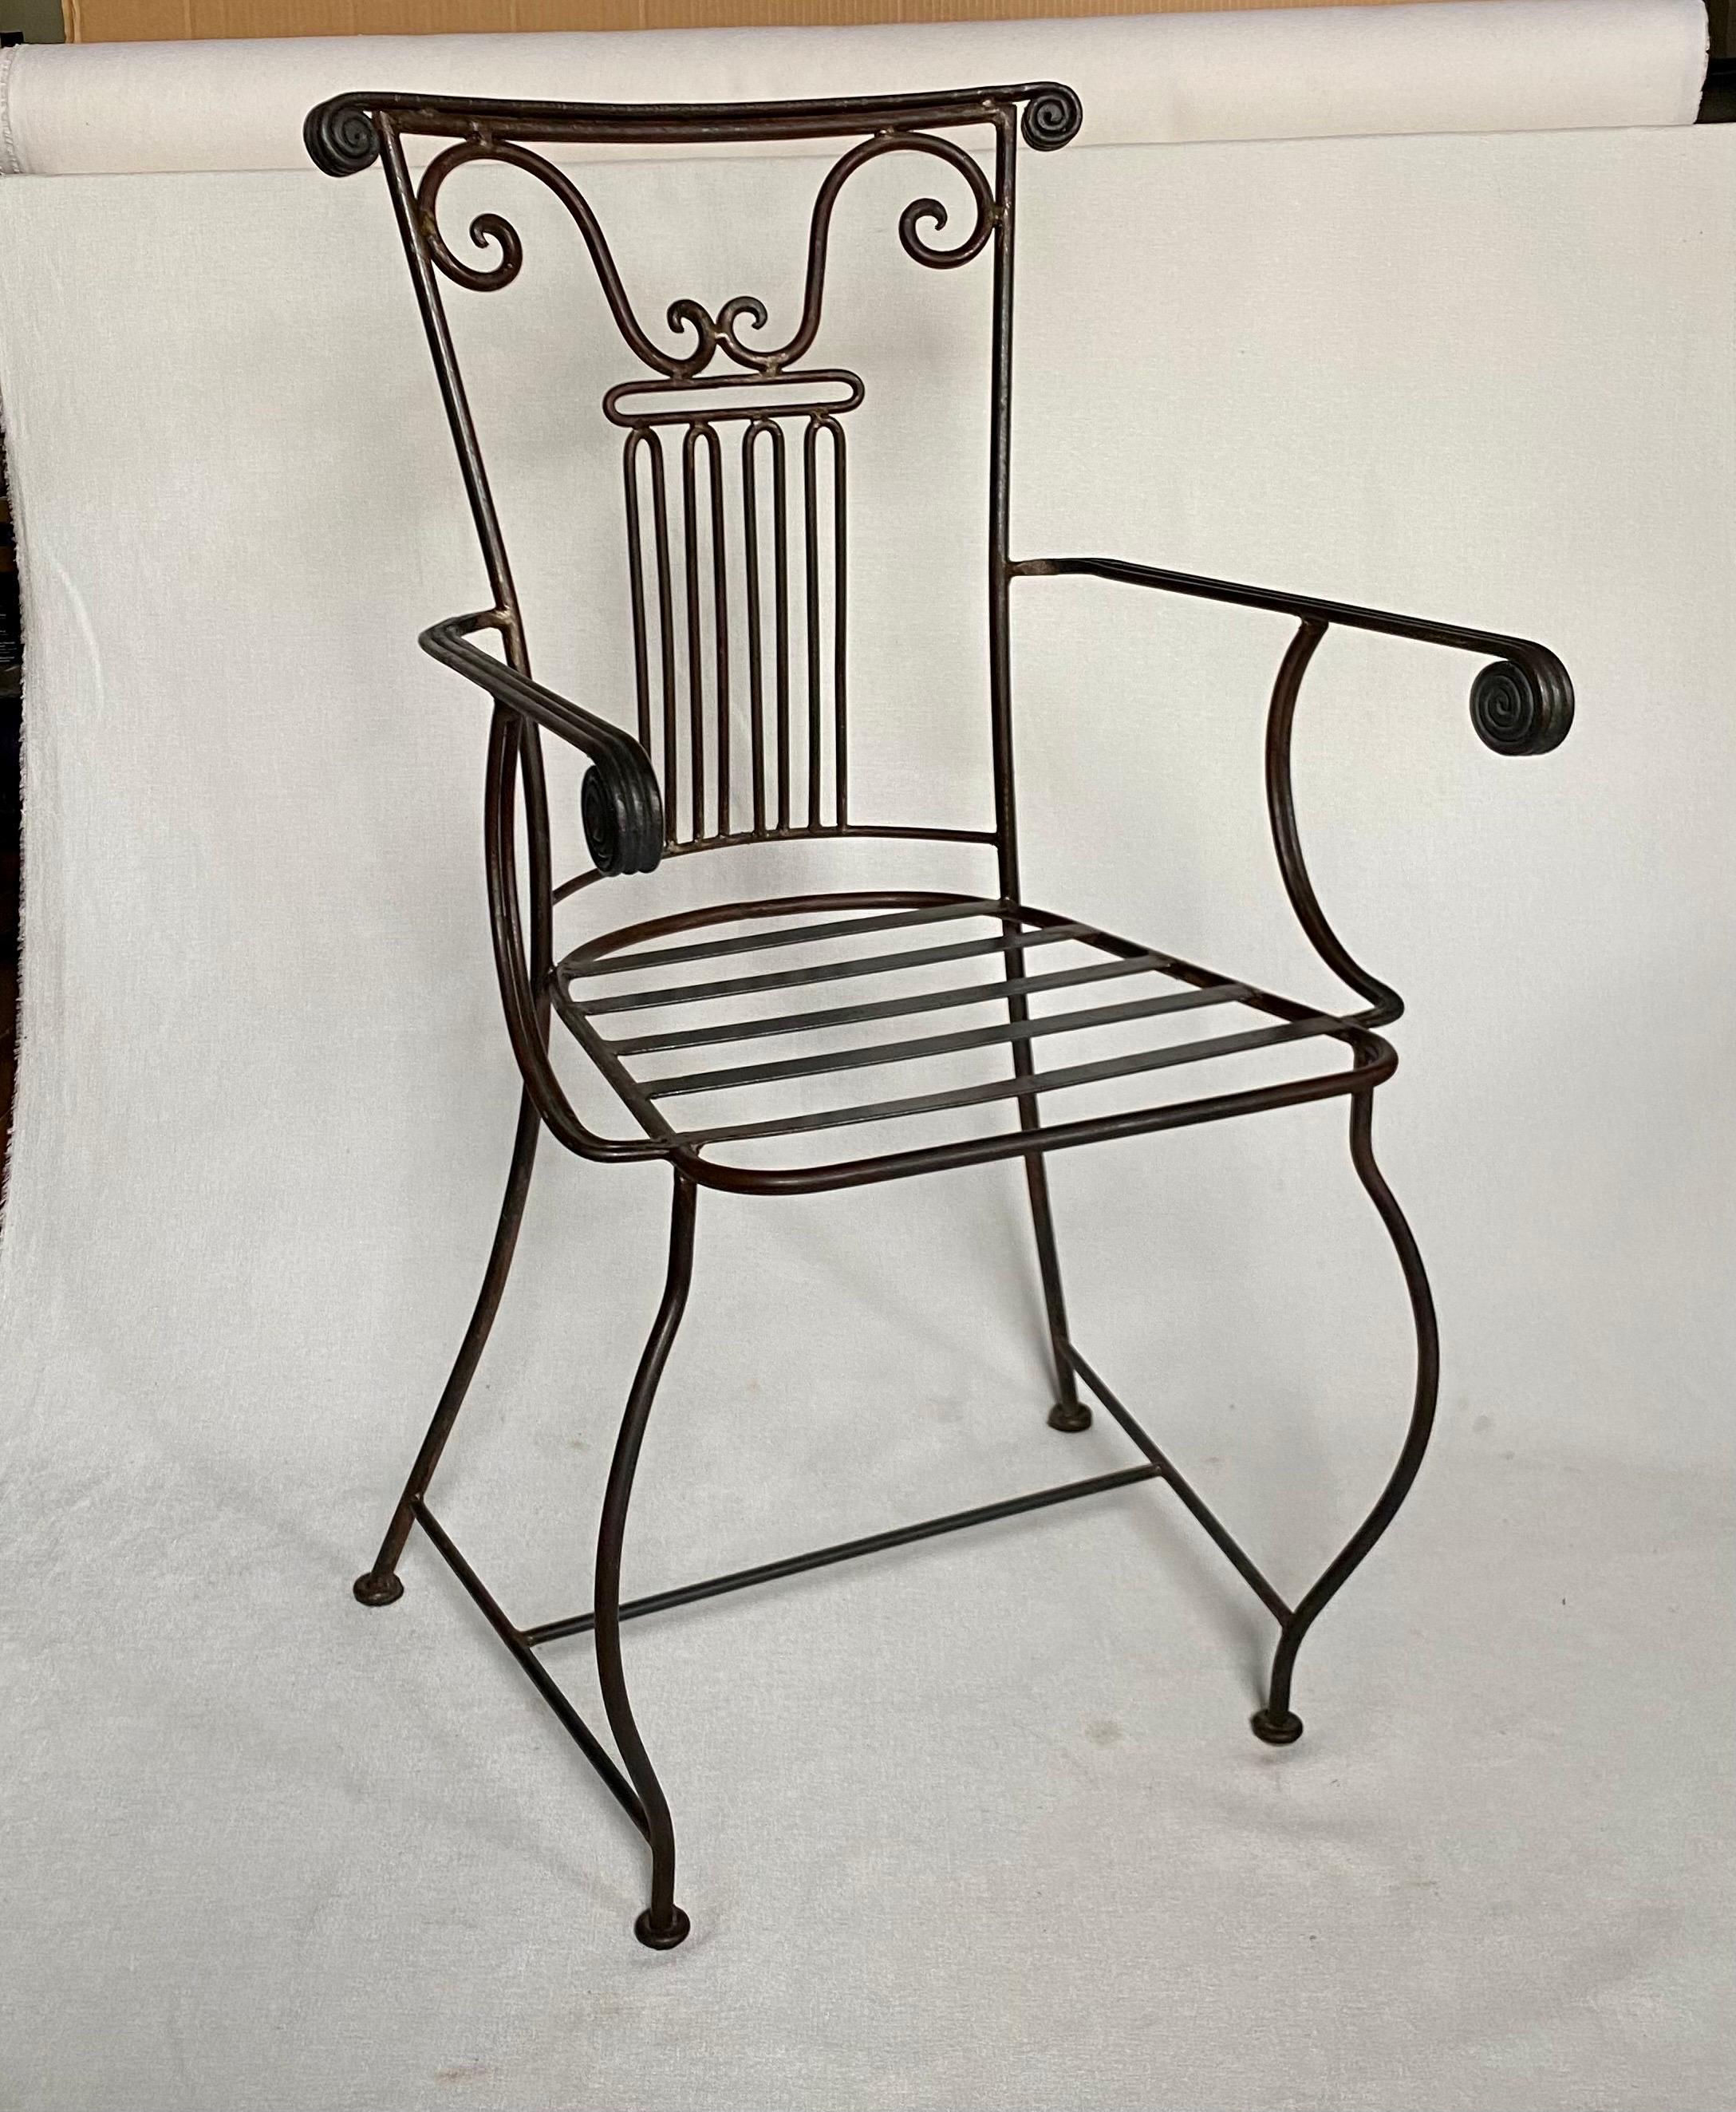 Sculptural Neoclassical style Roman column form iron accent armchair with decorative scrolls and flared cabriolet legs.  This stylized chair makes a perfect accent or desk chair.  Top with a seat cushion of your choosing.  

Arm Height: 26.5 Inches. 